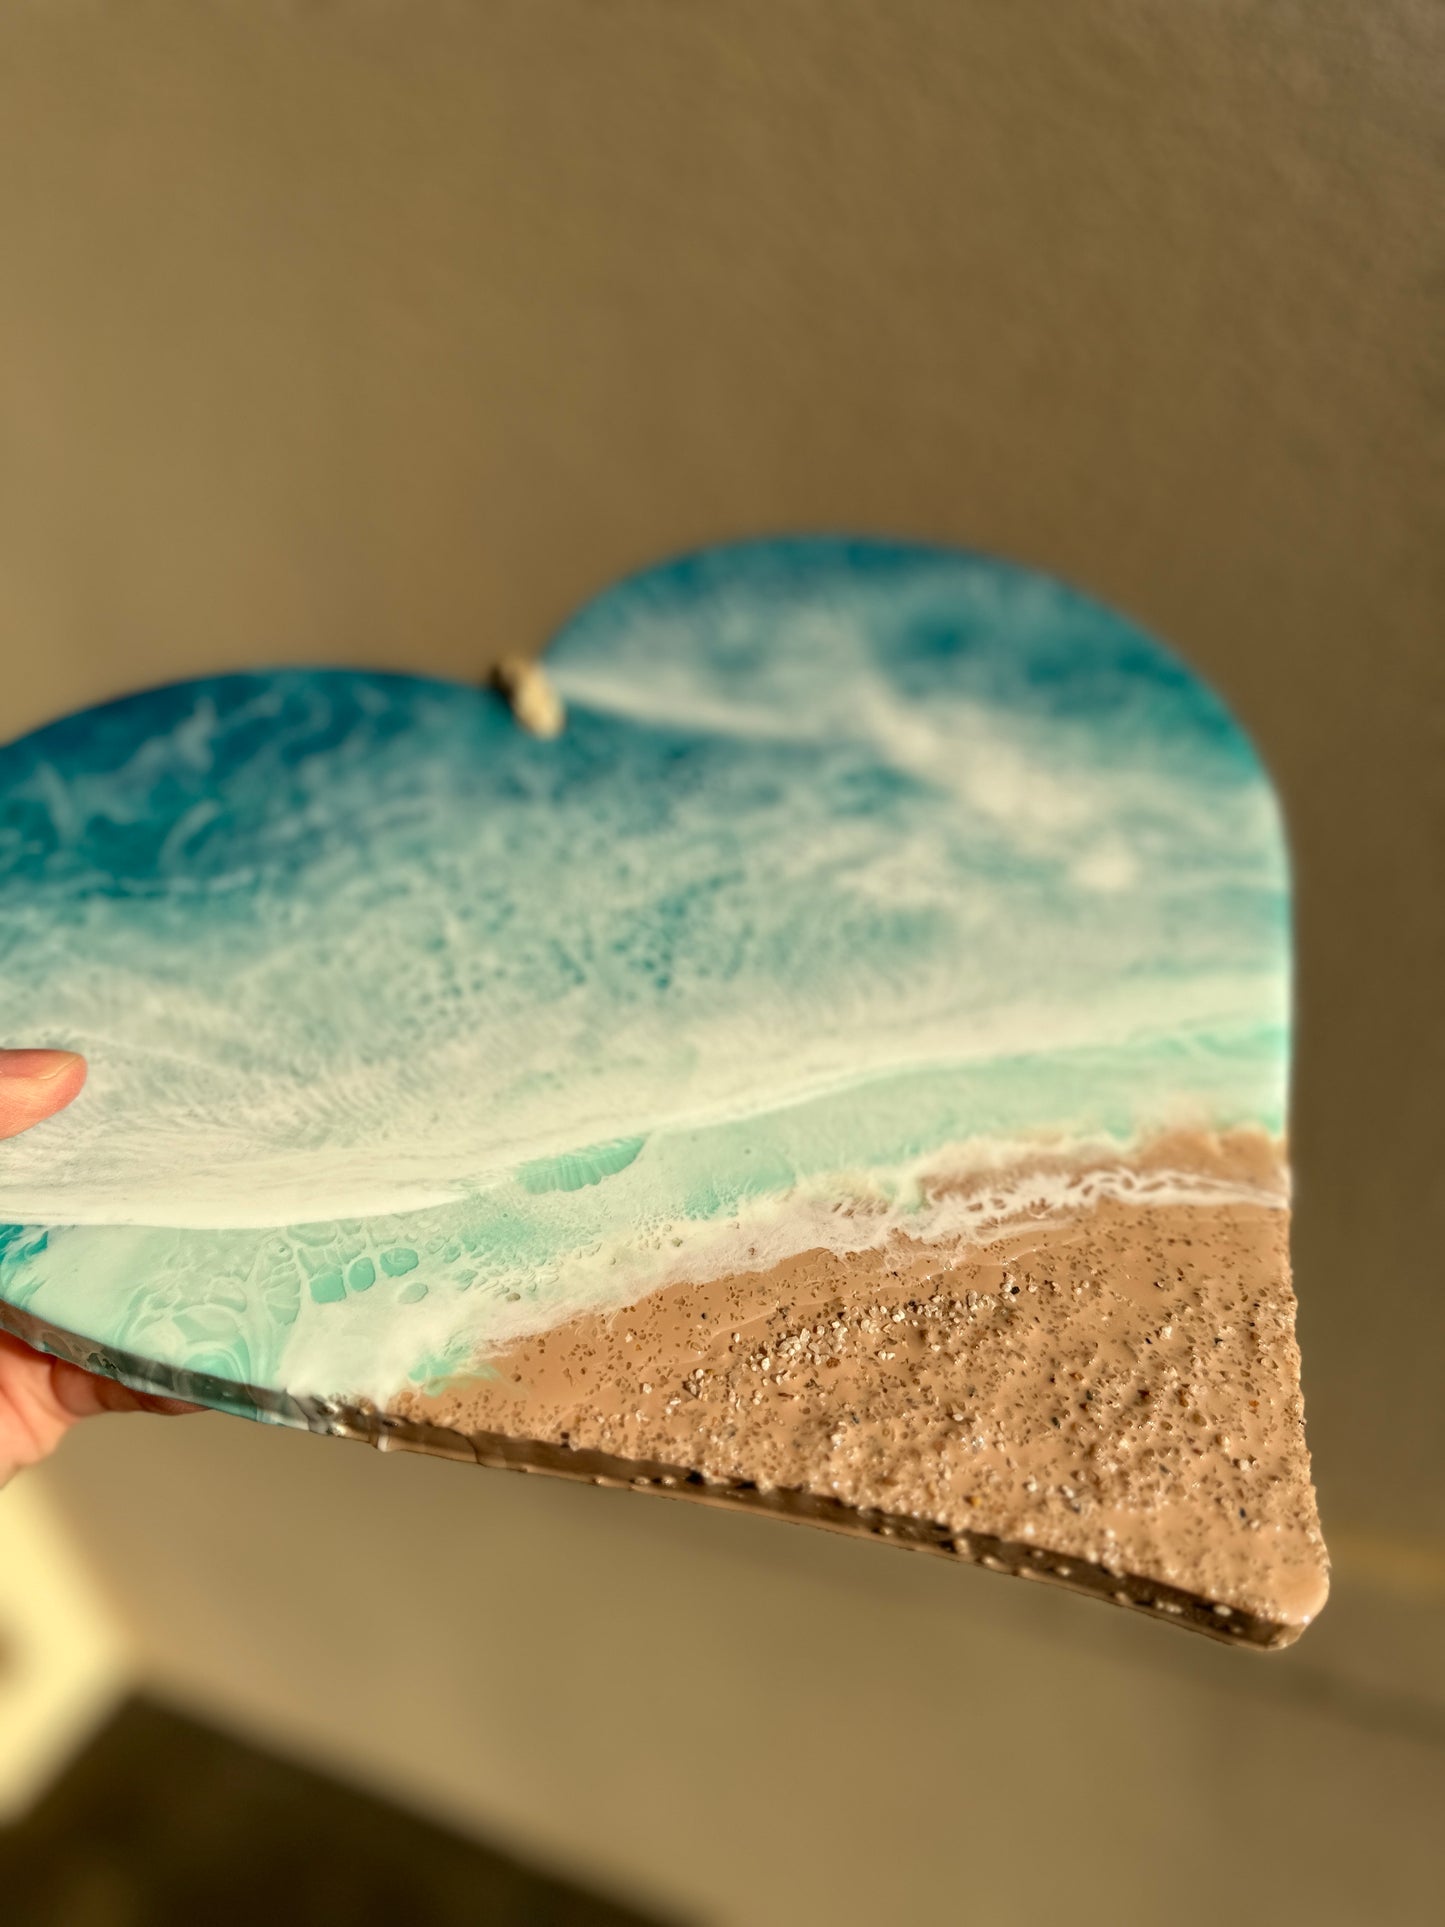 CHERISH - ocean style heart shaped wall art with dimensional waves